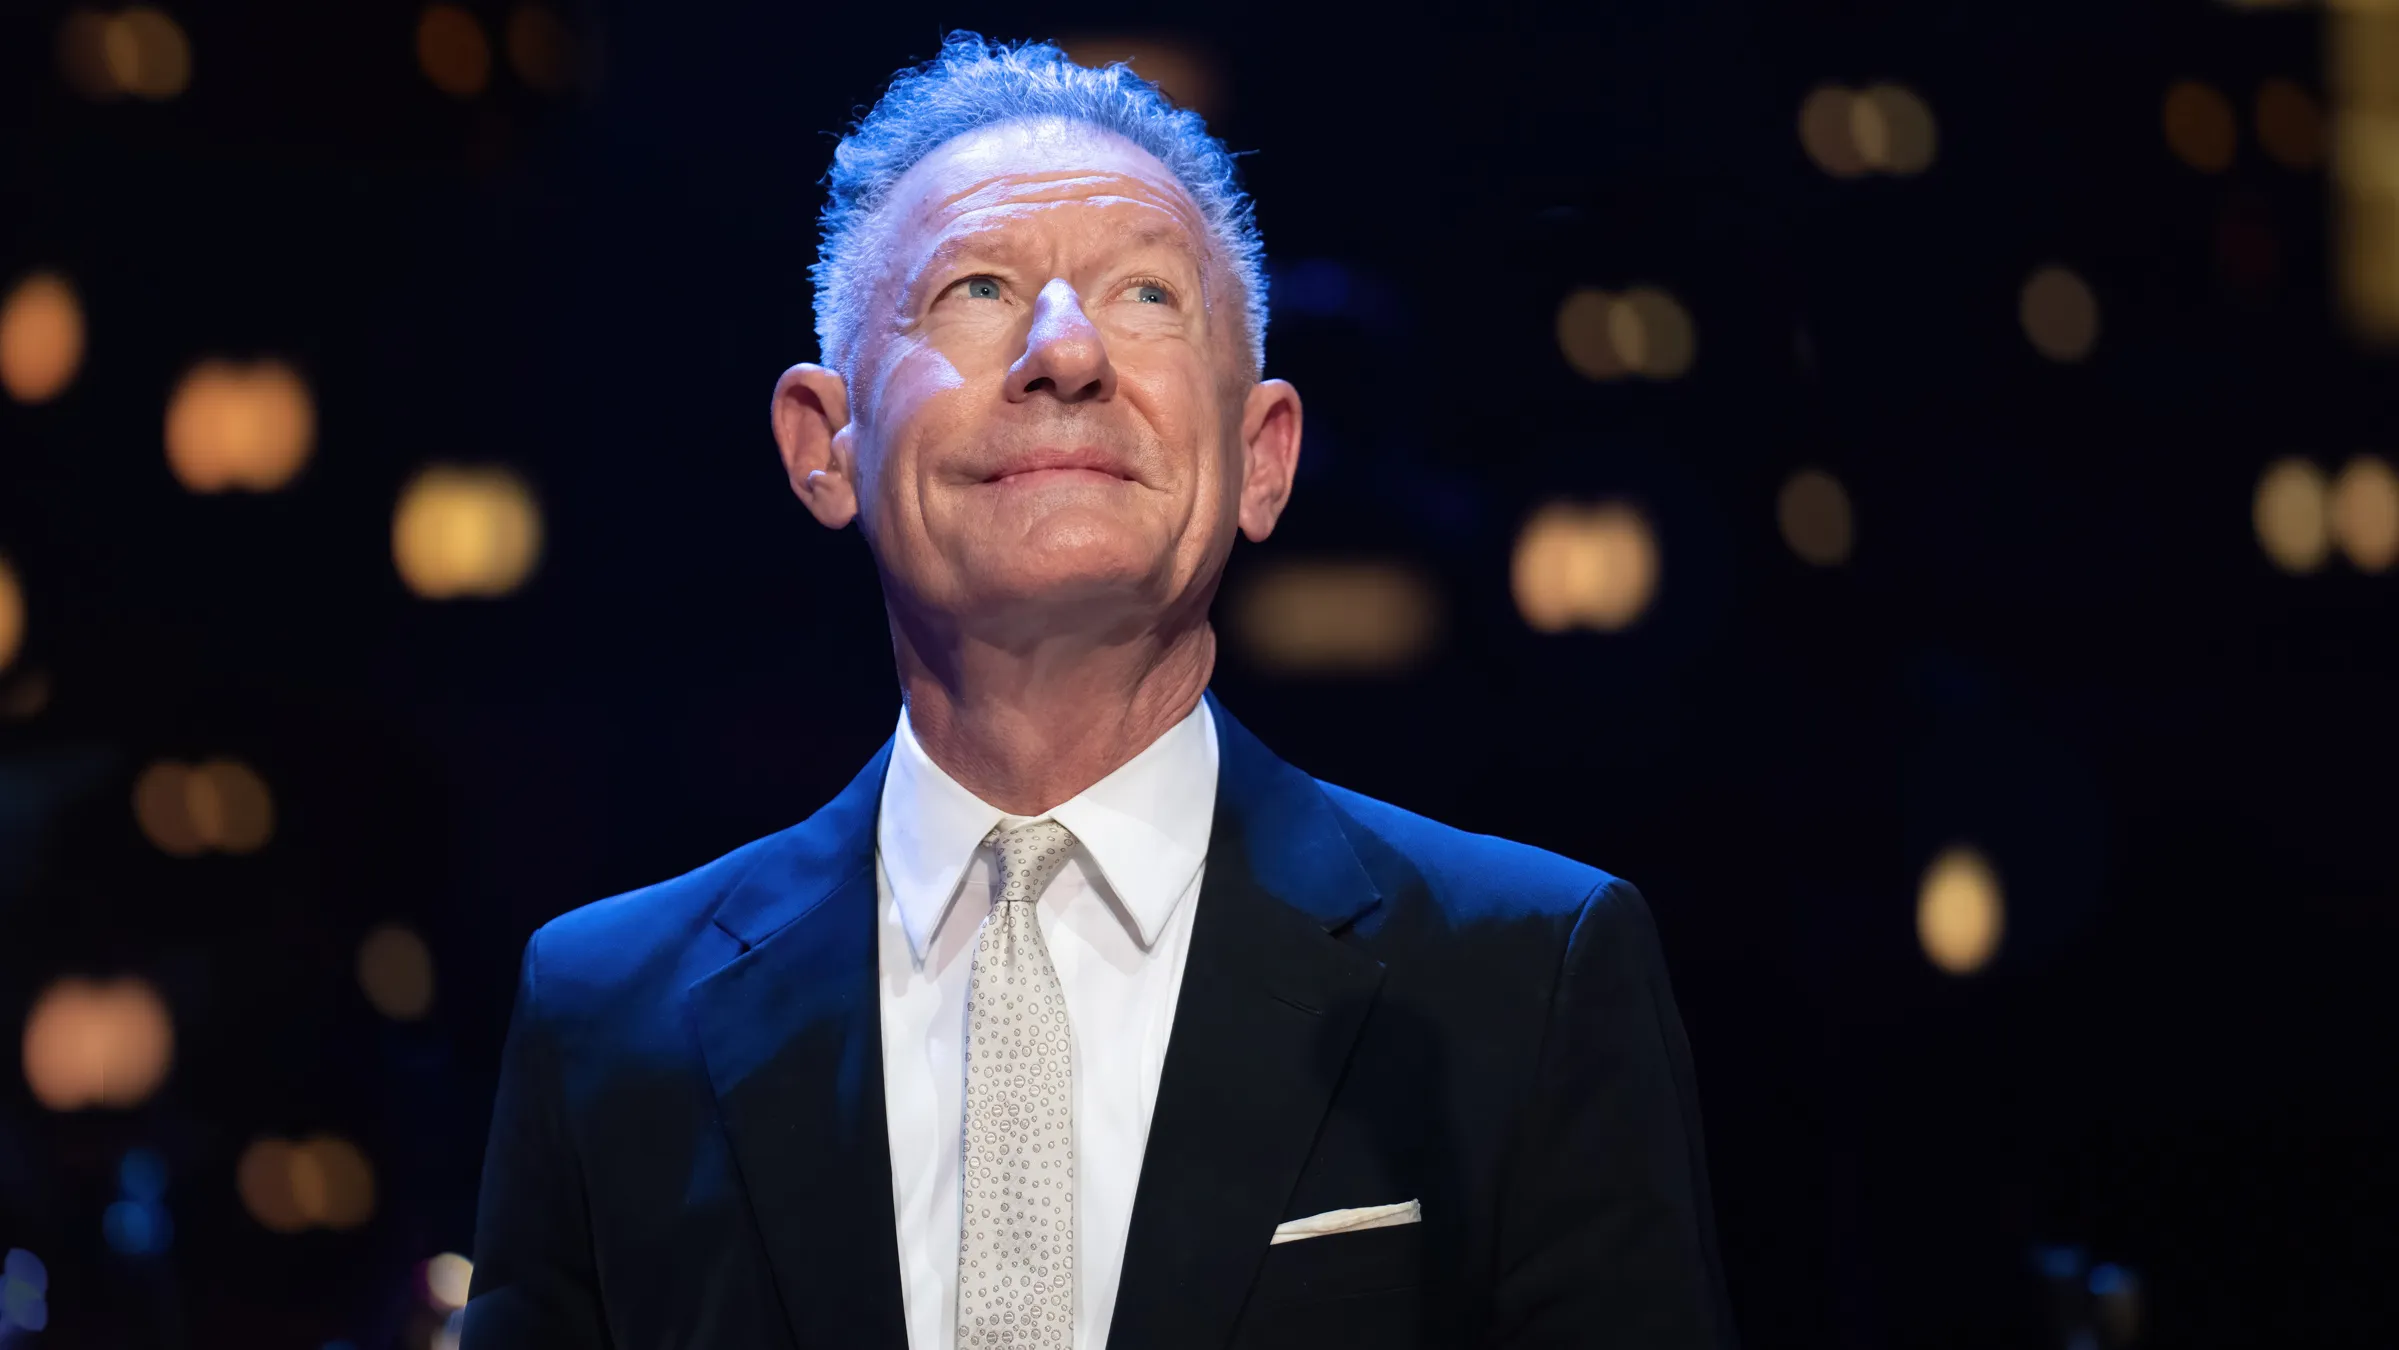 Lyle Lovett on ACL stage by Susan Cordeiro special to American statesman